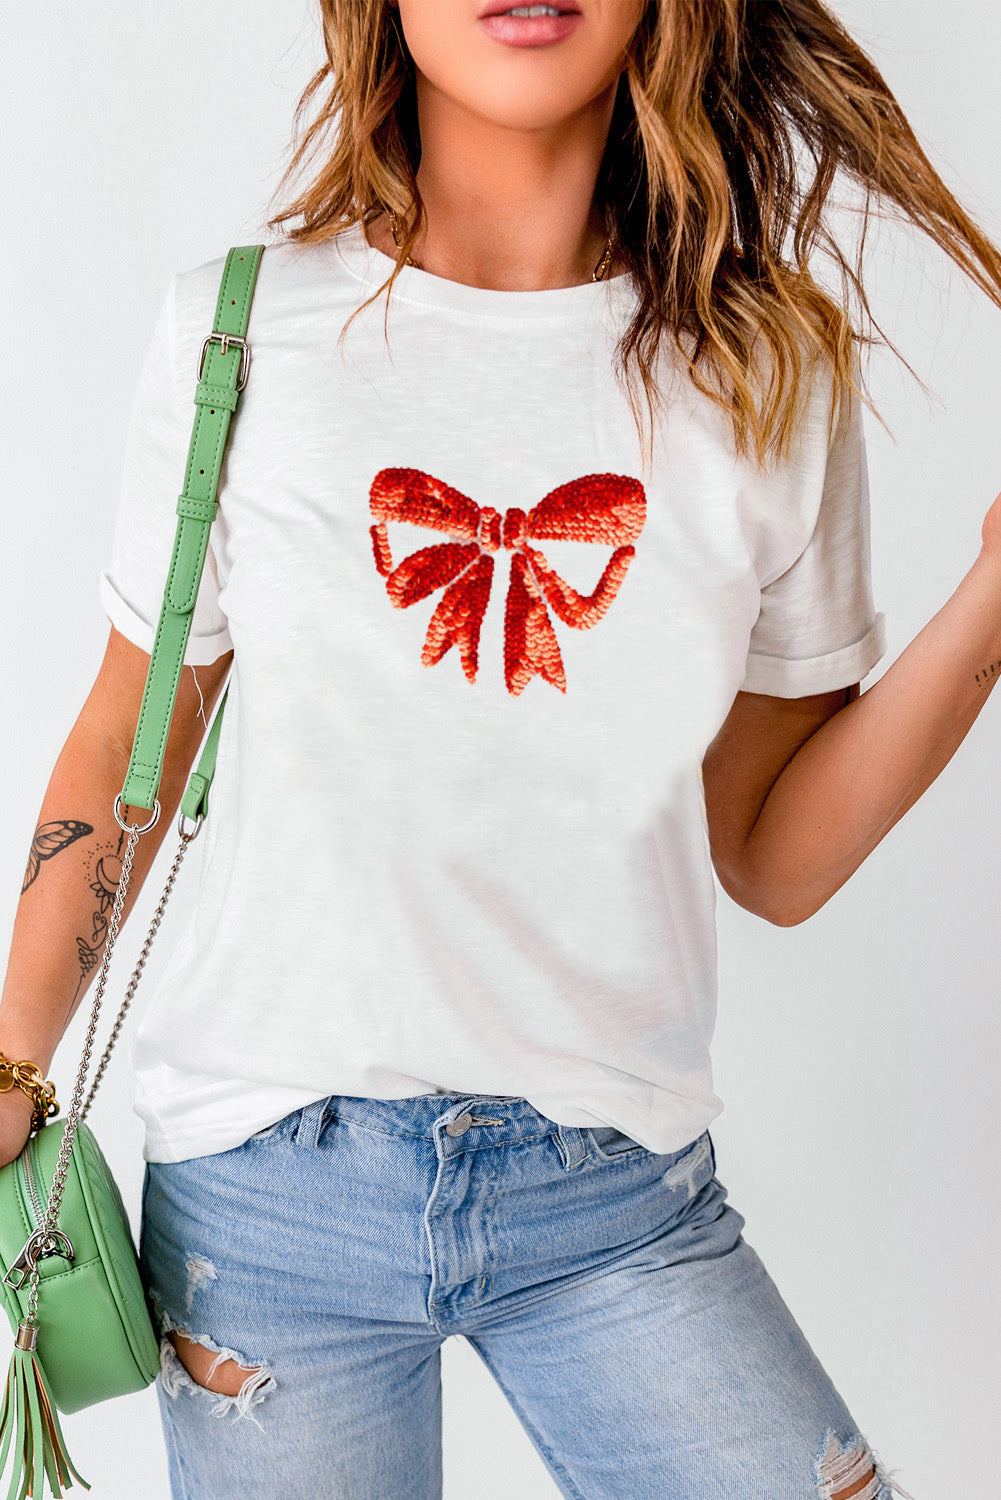 White Bowknot Graphic Casual T Shirt Graphic Tees JT's Designer Fashion